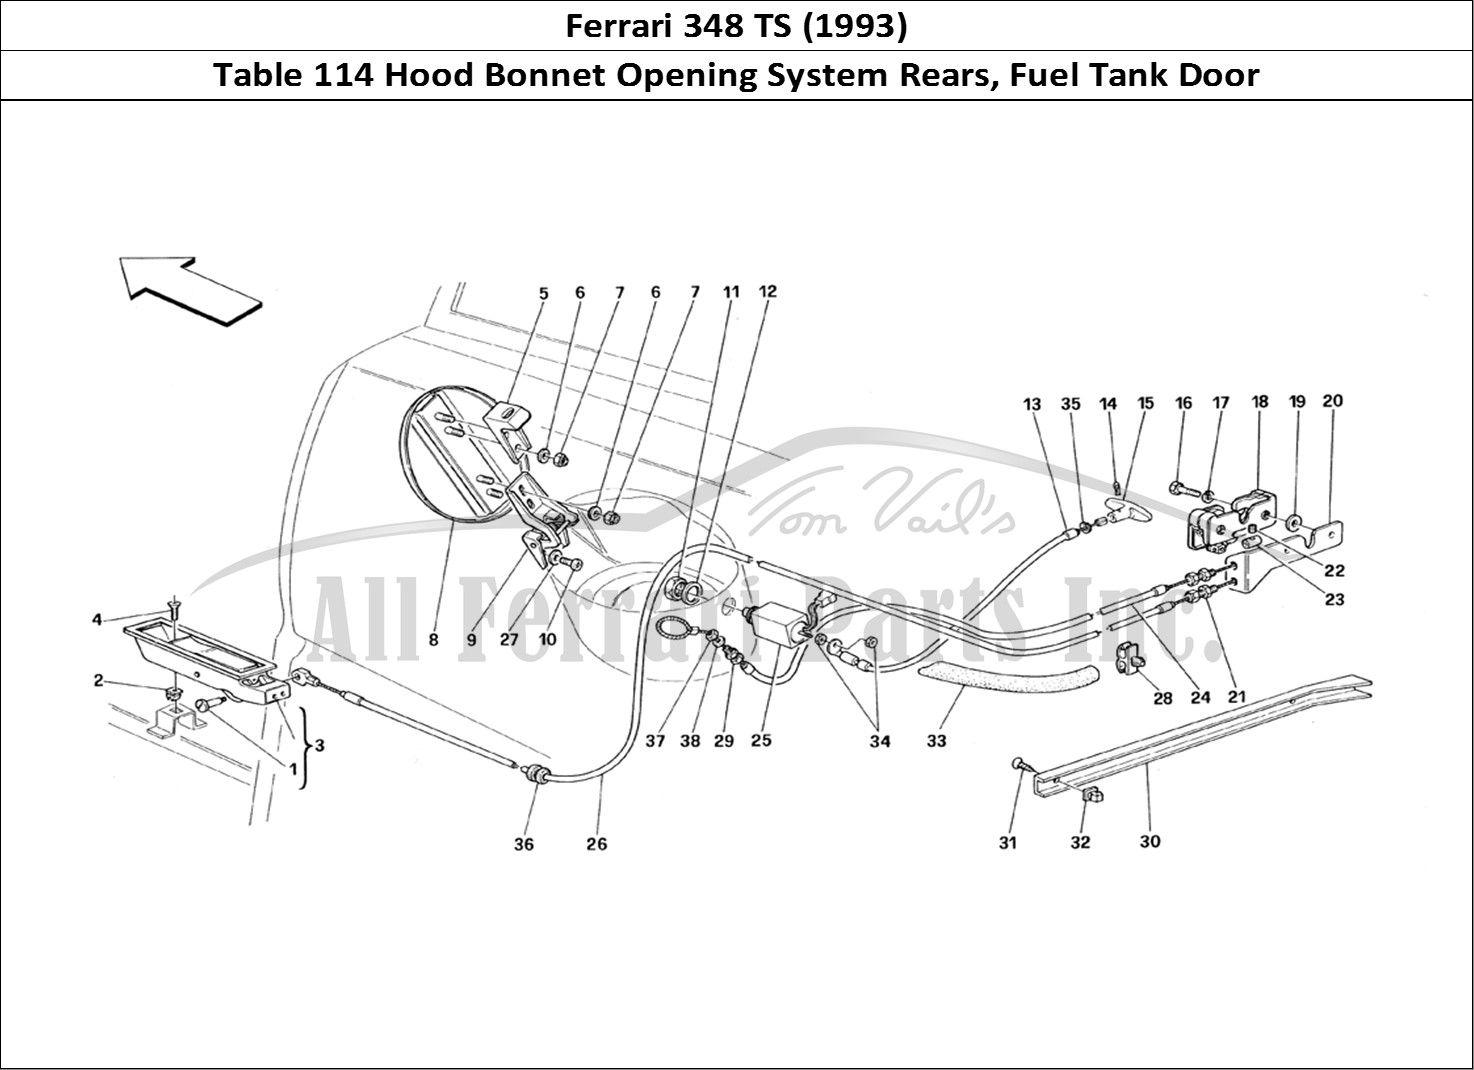 Ferrari Parts Ferrari 348 TB (1993) Page 114 Opening Devices for Rear